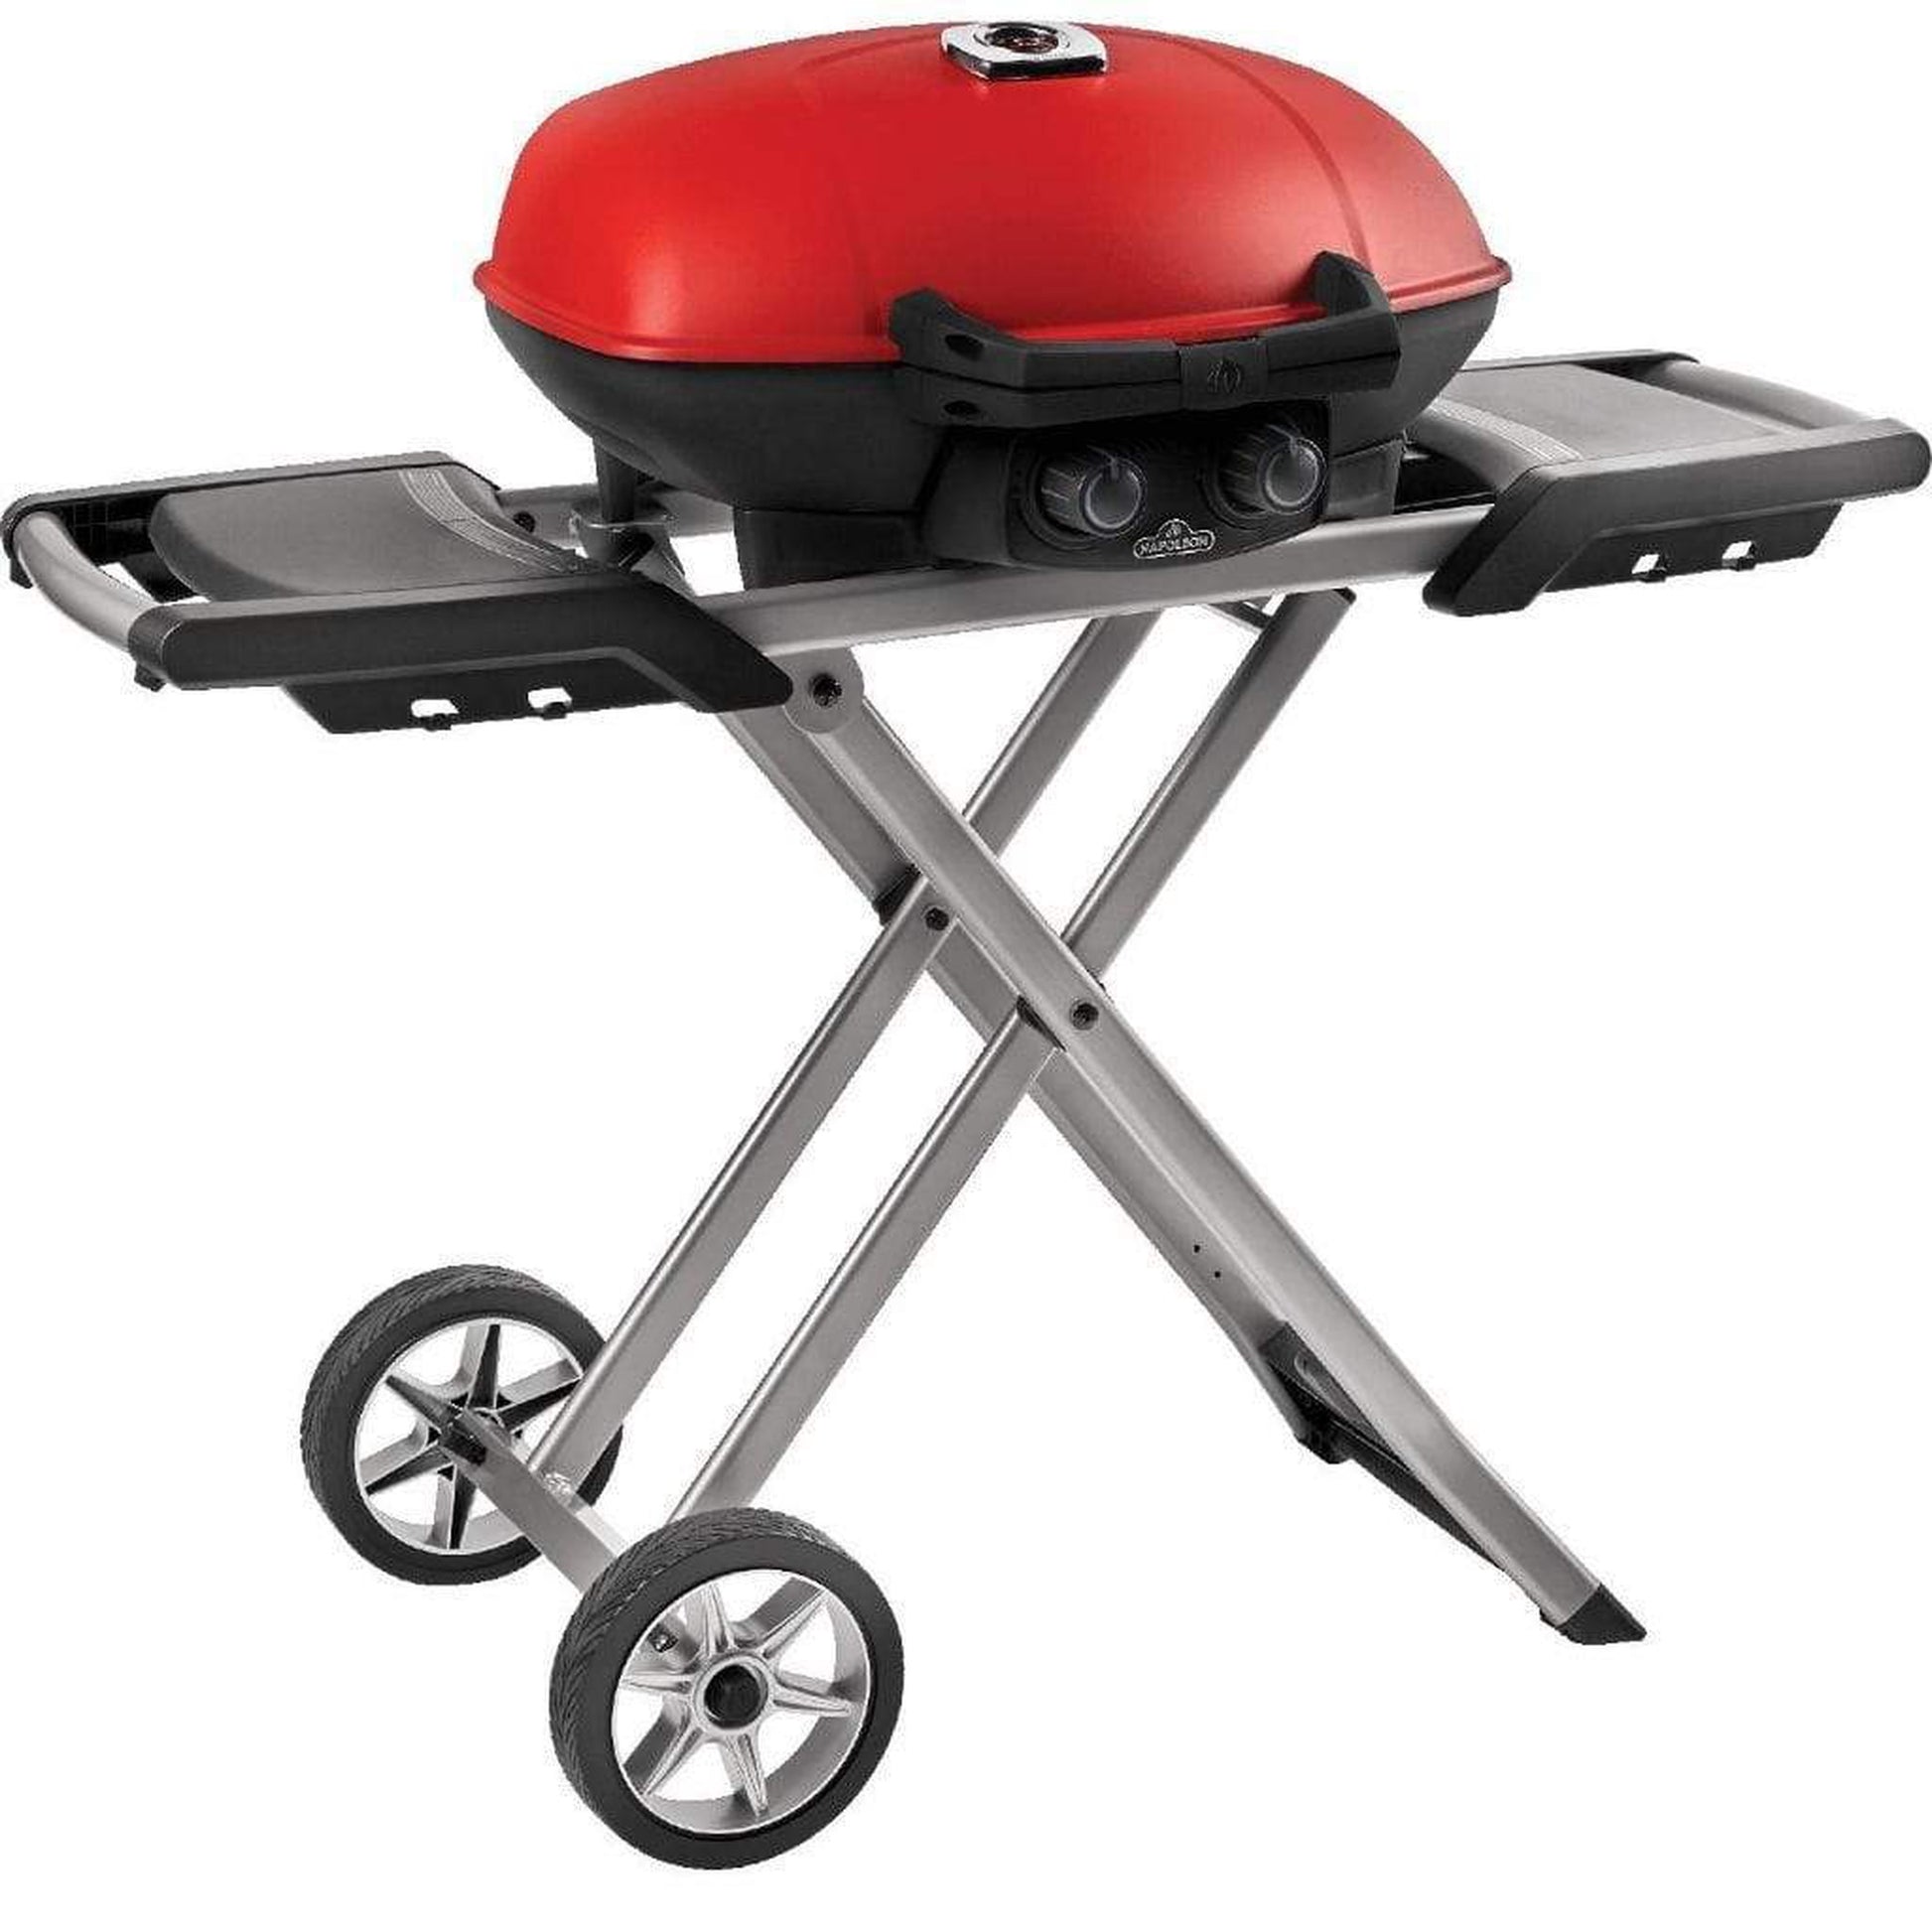 Napoleon 44" TravelQ 285X Portable Freestanding Propane Gas Grill With Griddle - Red